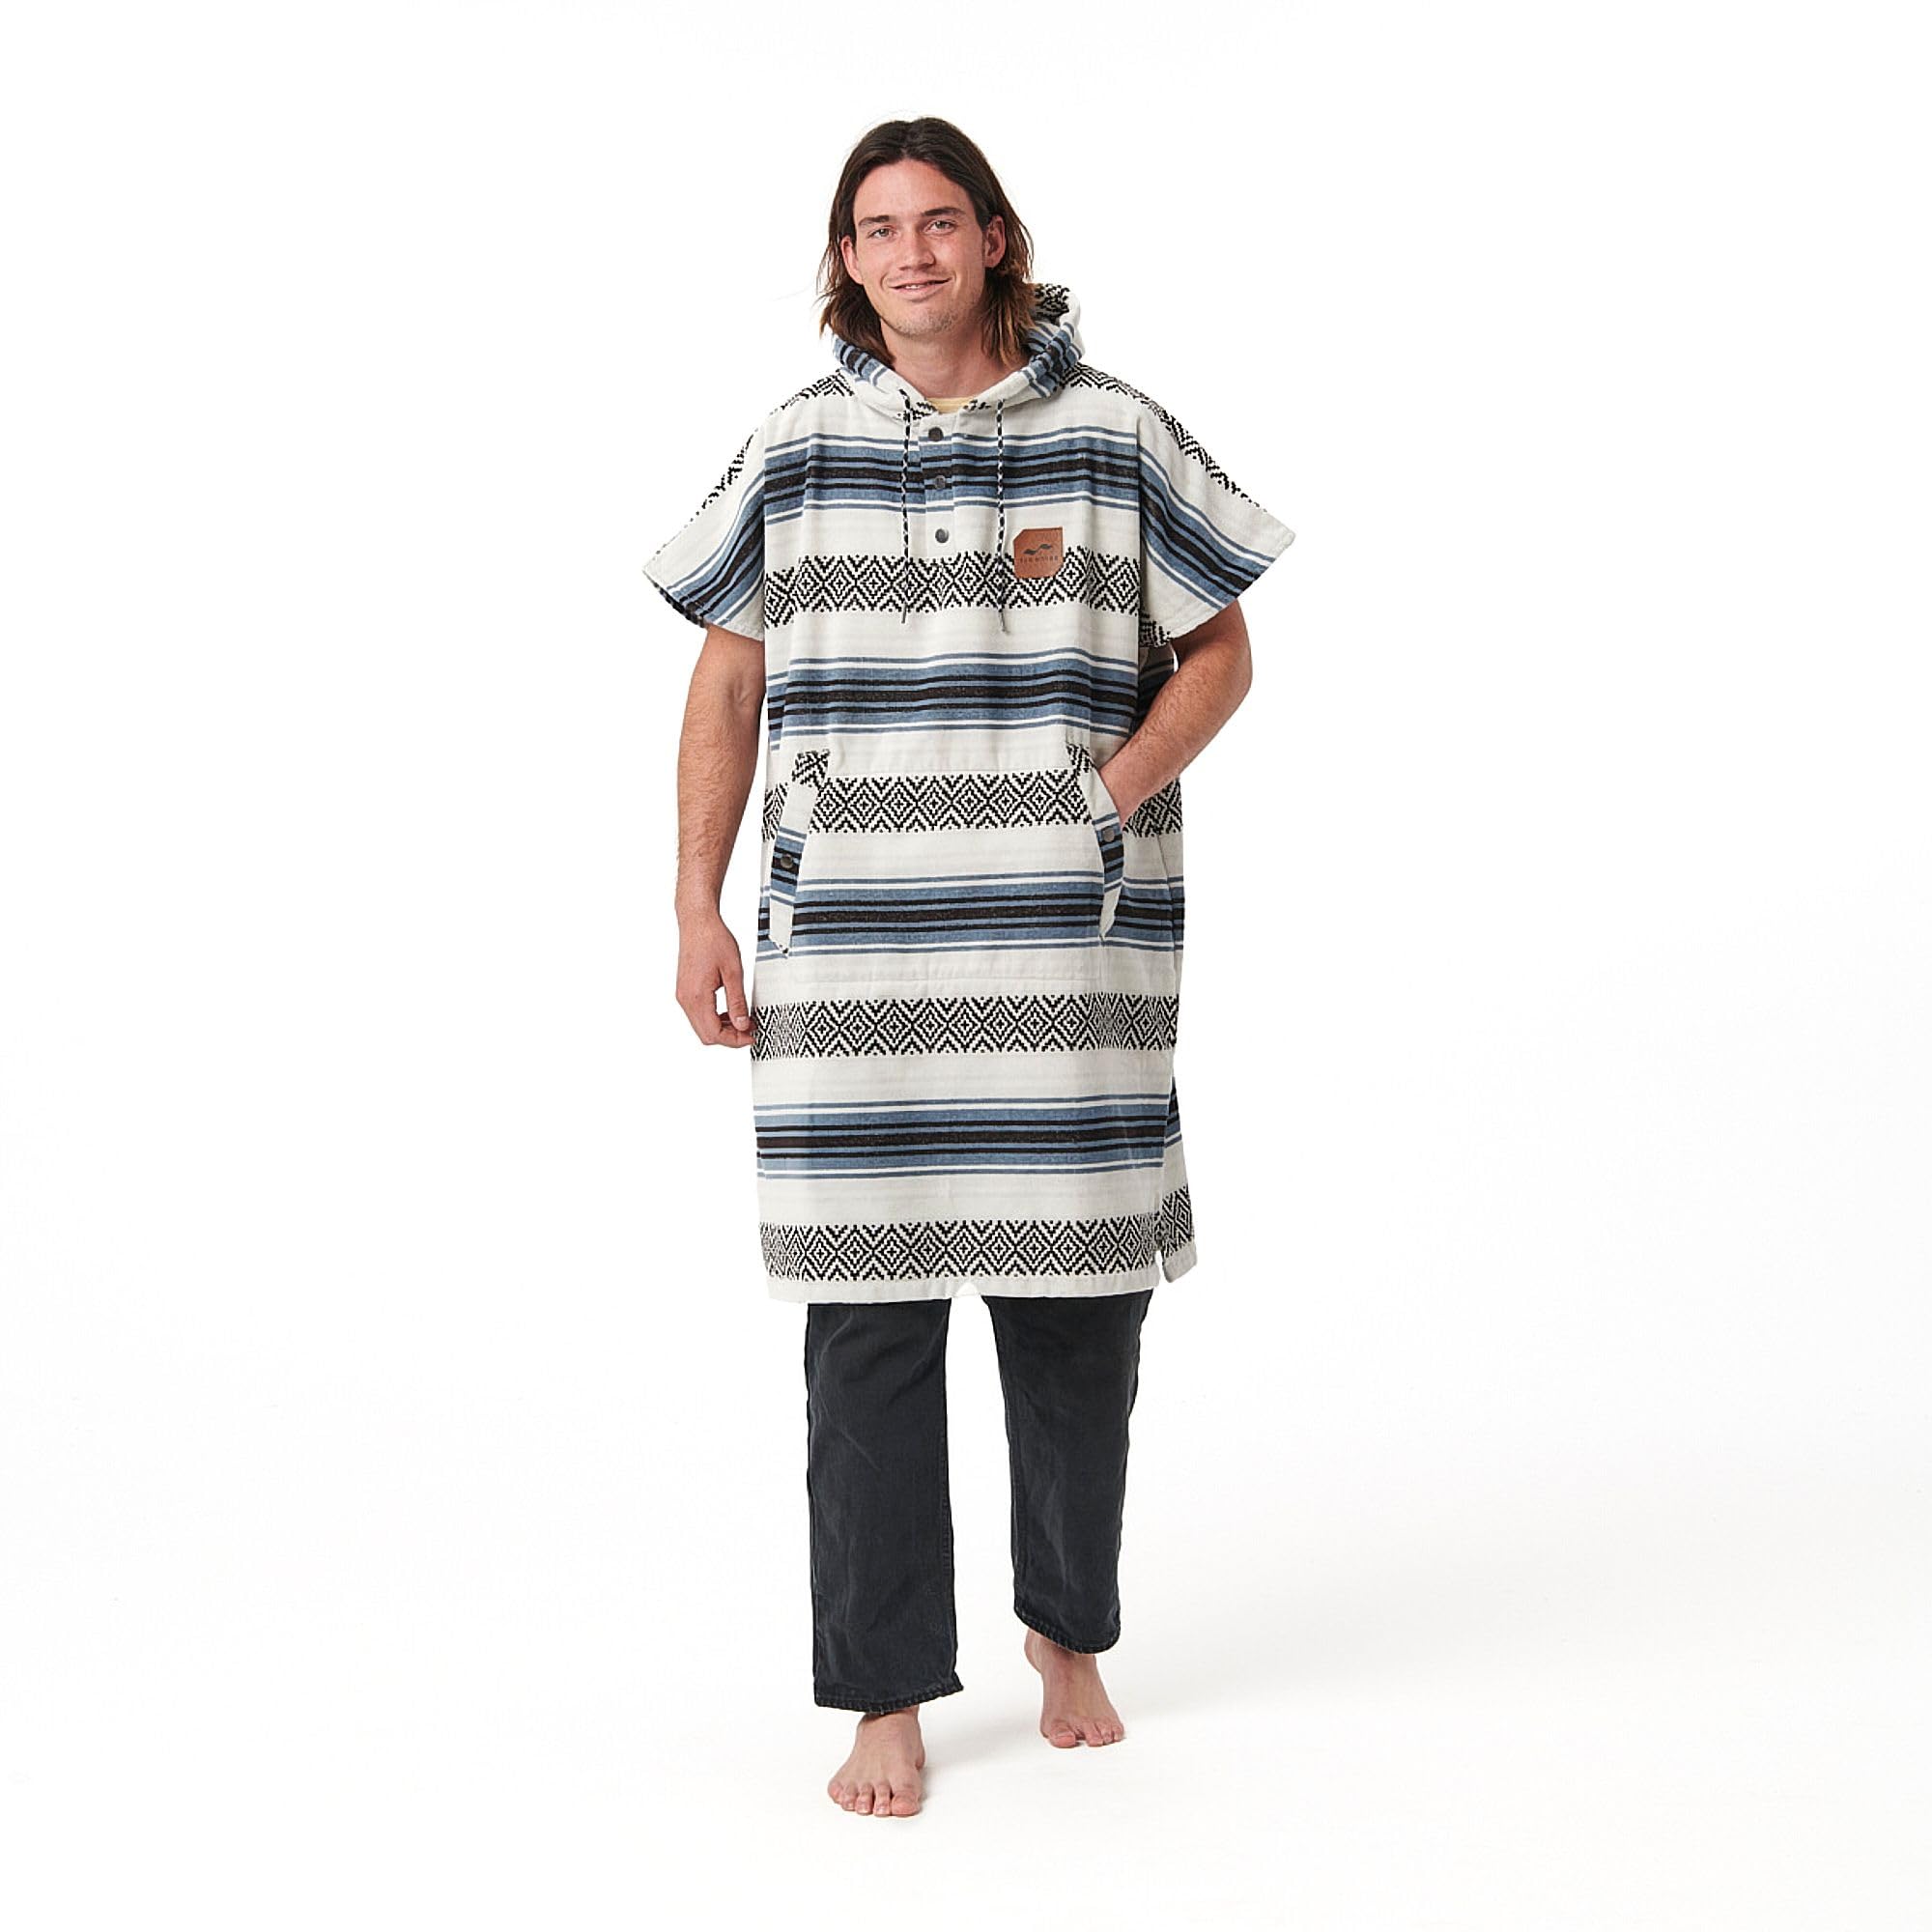 Slowtide Extra-Warm Changing Poncho | Change privately | Includes Kangaroo pouch & double layer woven hood (Small - Medium, OSO)